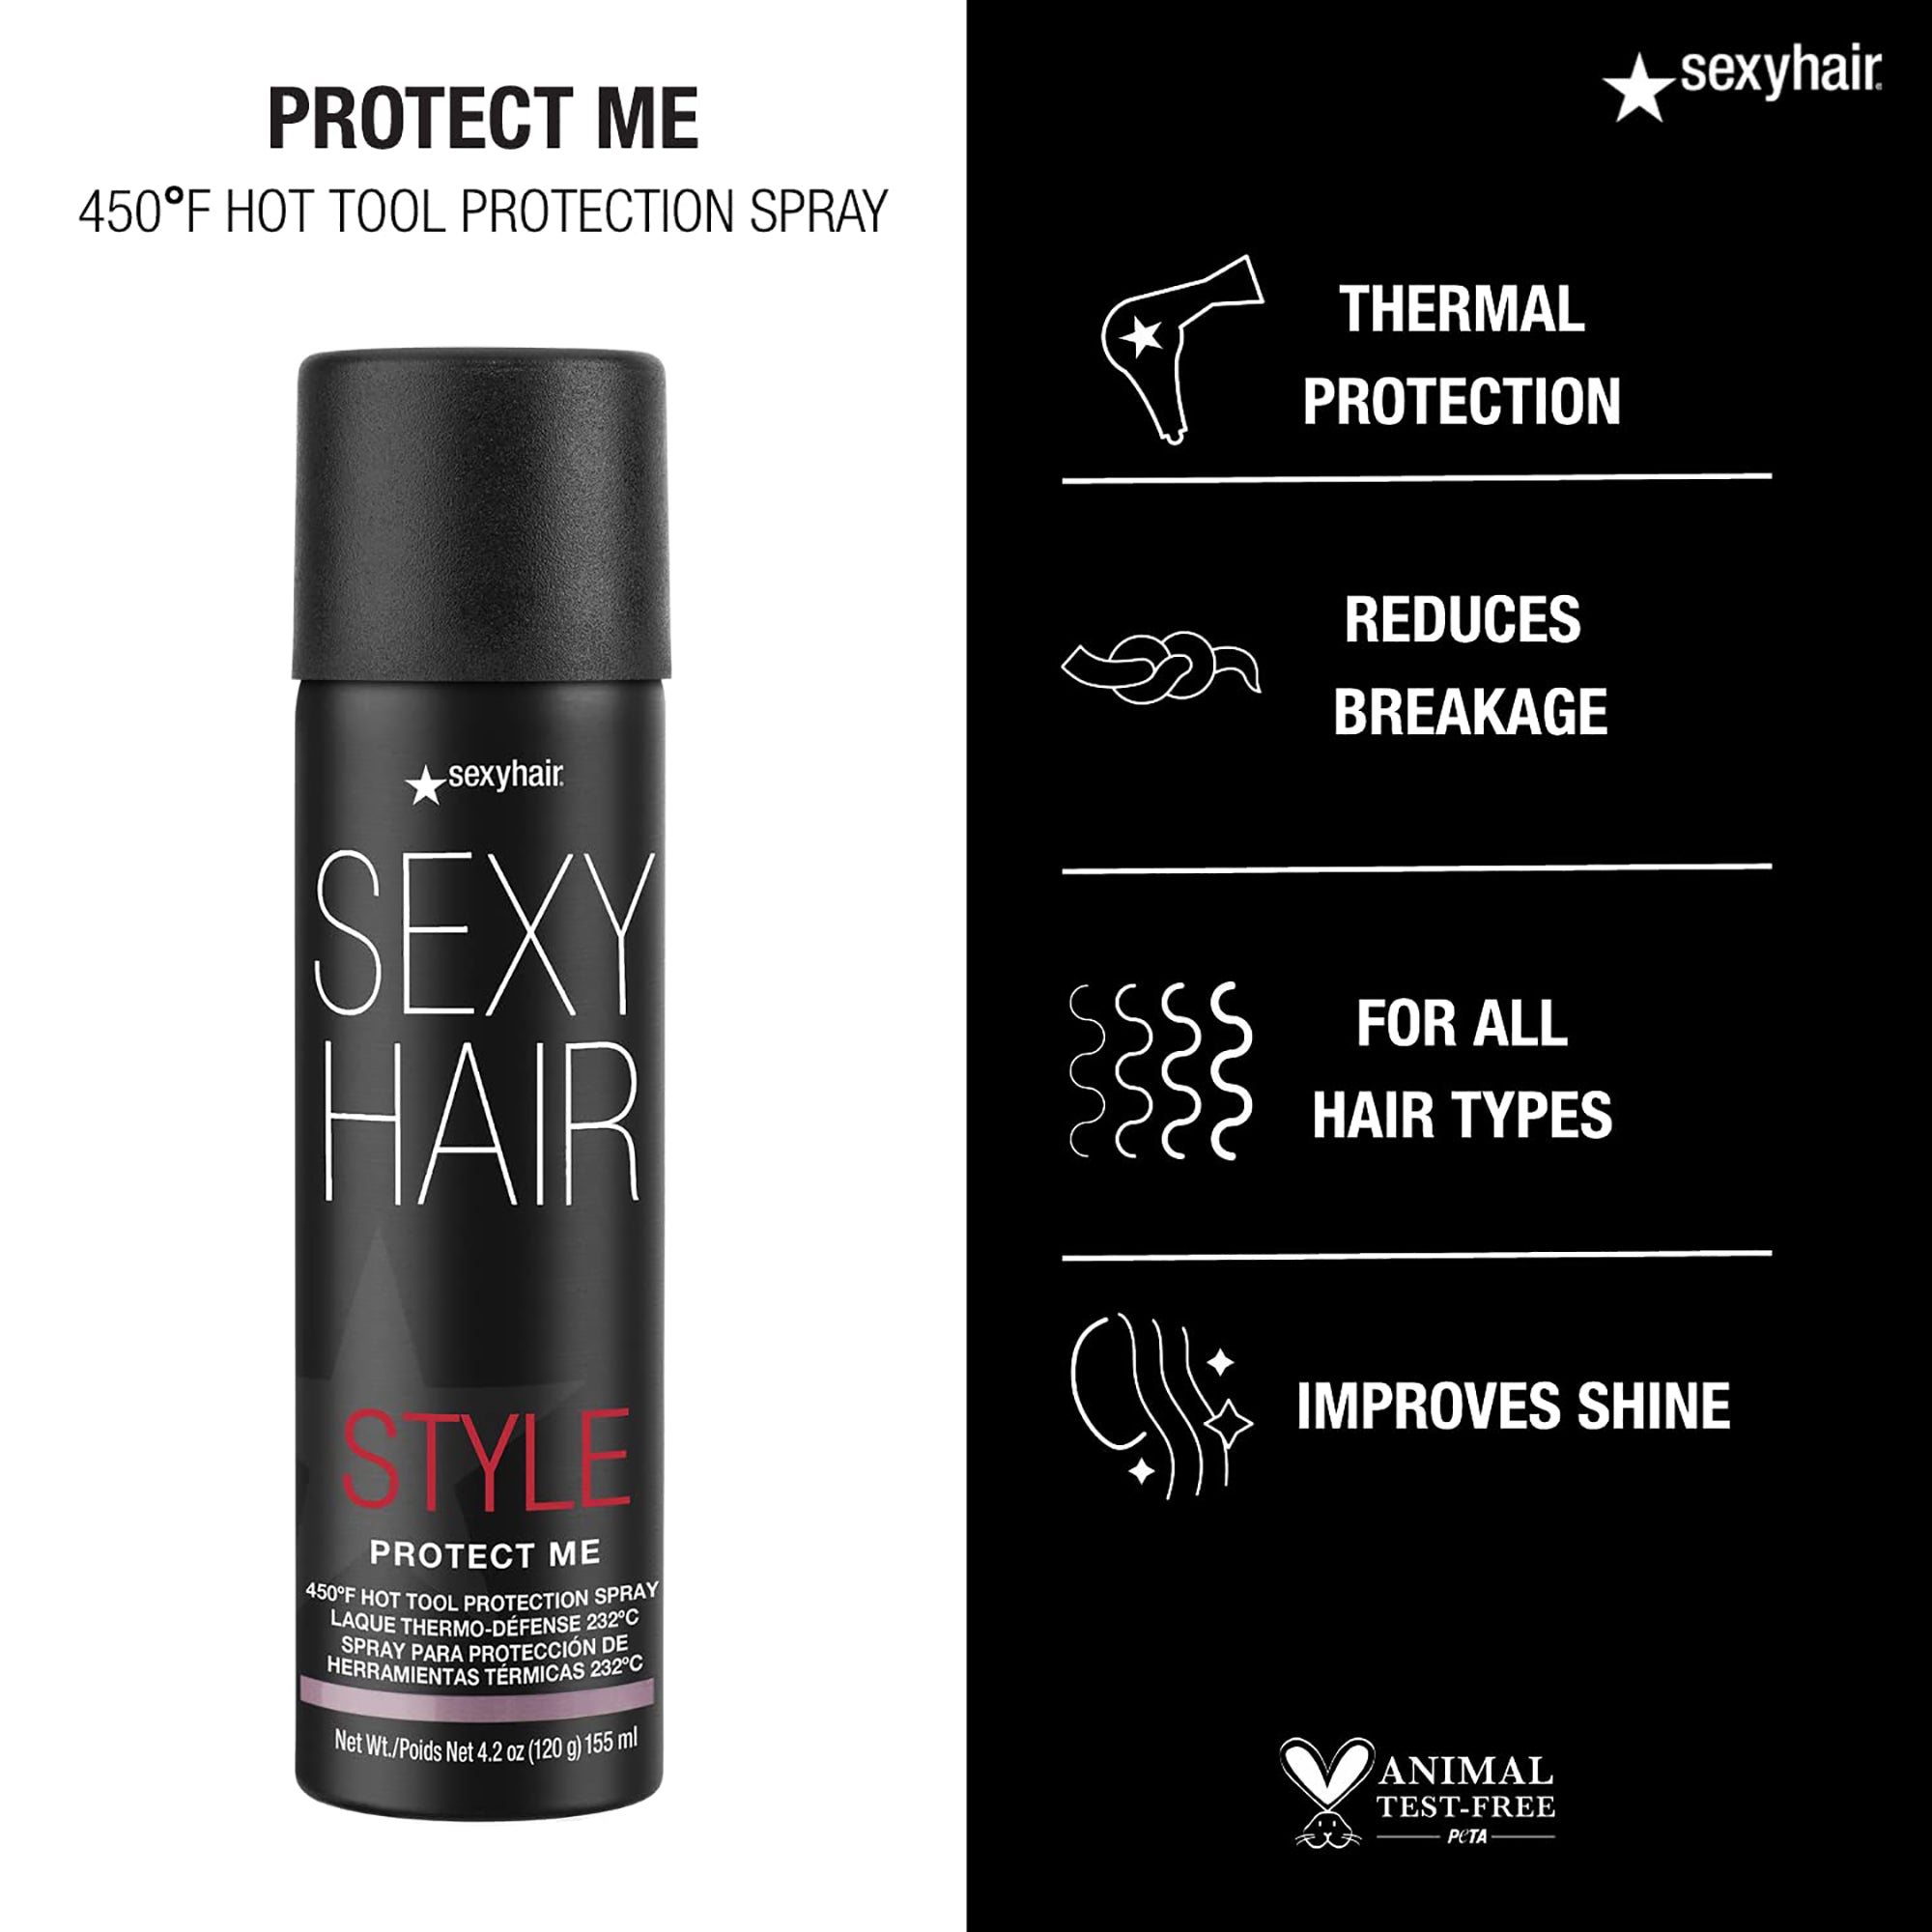 Sexy Hair Style SexyHair Protect Me Hot Tool Protection Spray / 4.2